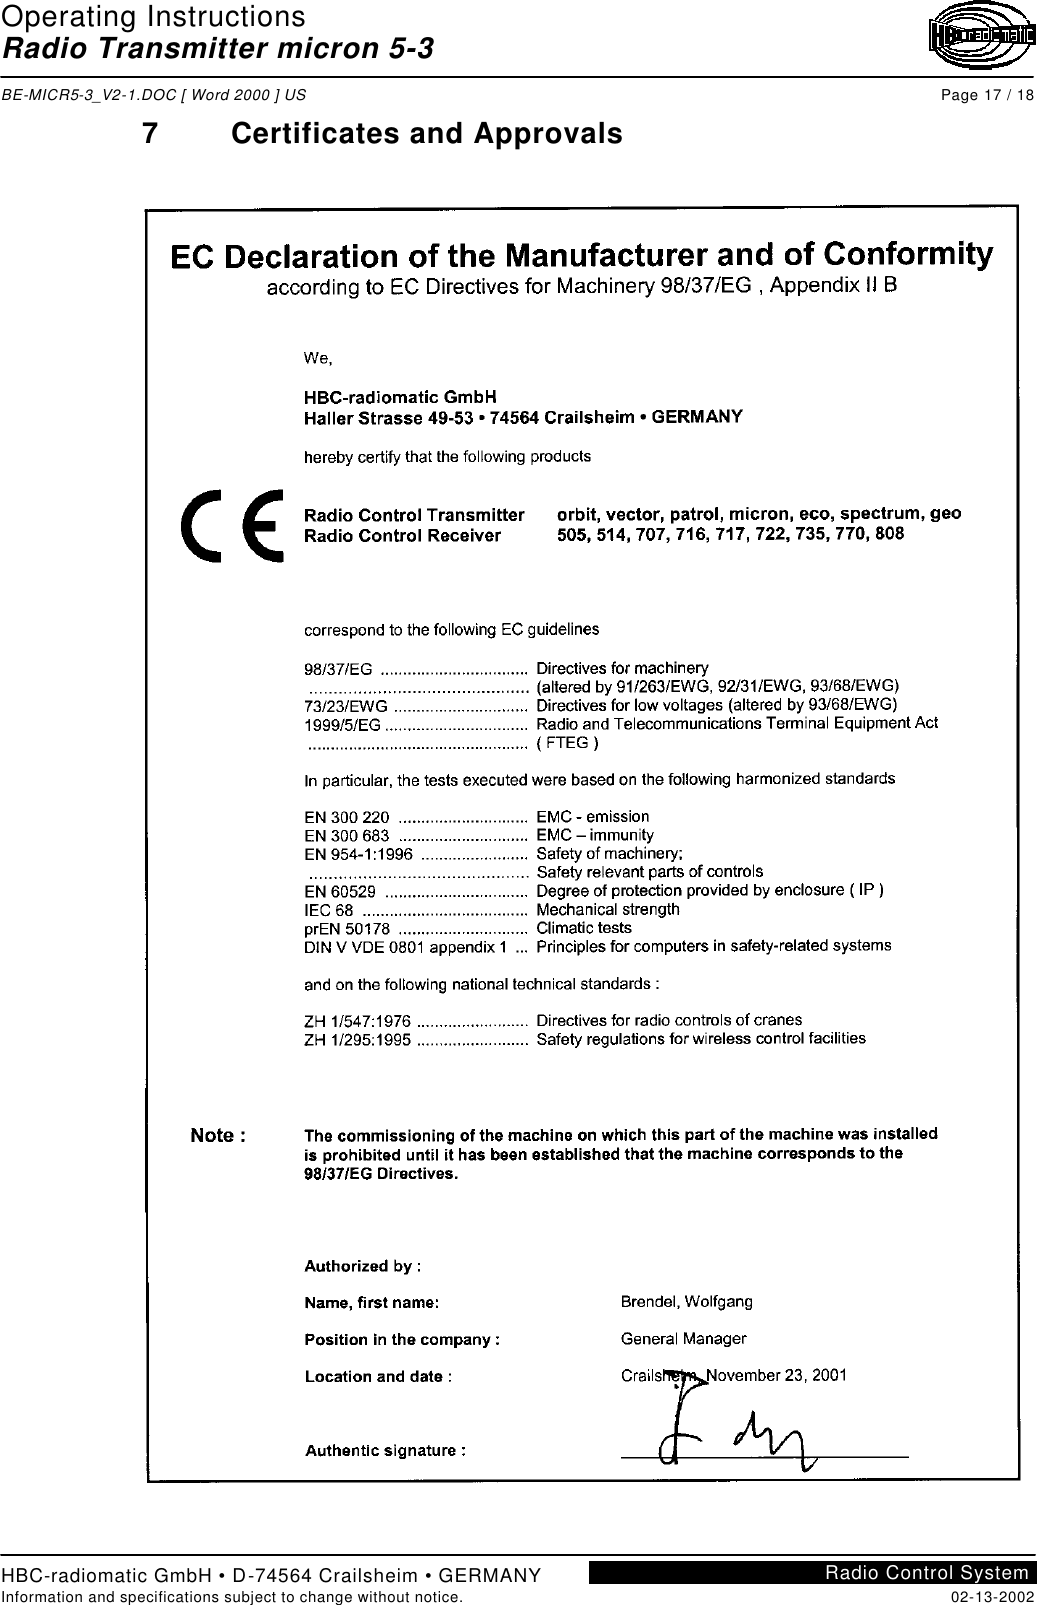 Operating Instructions Radio Transmitter micron 5-3  BE-MICR5-3_V2-1.DOC [ Word 2000 ] US Page 17 / 18 HBC-radiomatic GmbH • D-74564 Crailsheim • GERMANY Information and specifications subject to change without notice. 02-13-2002 Radio Control System  7 Certificates and Approvals   